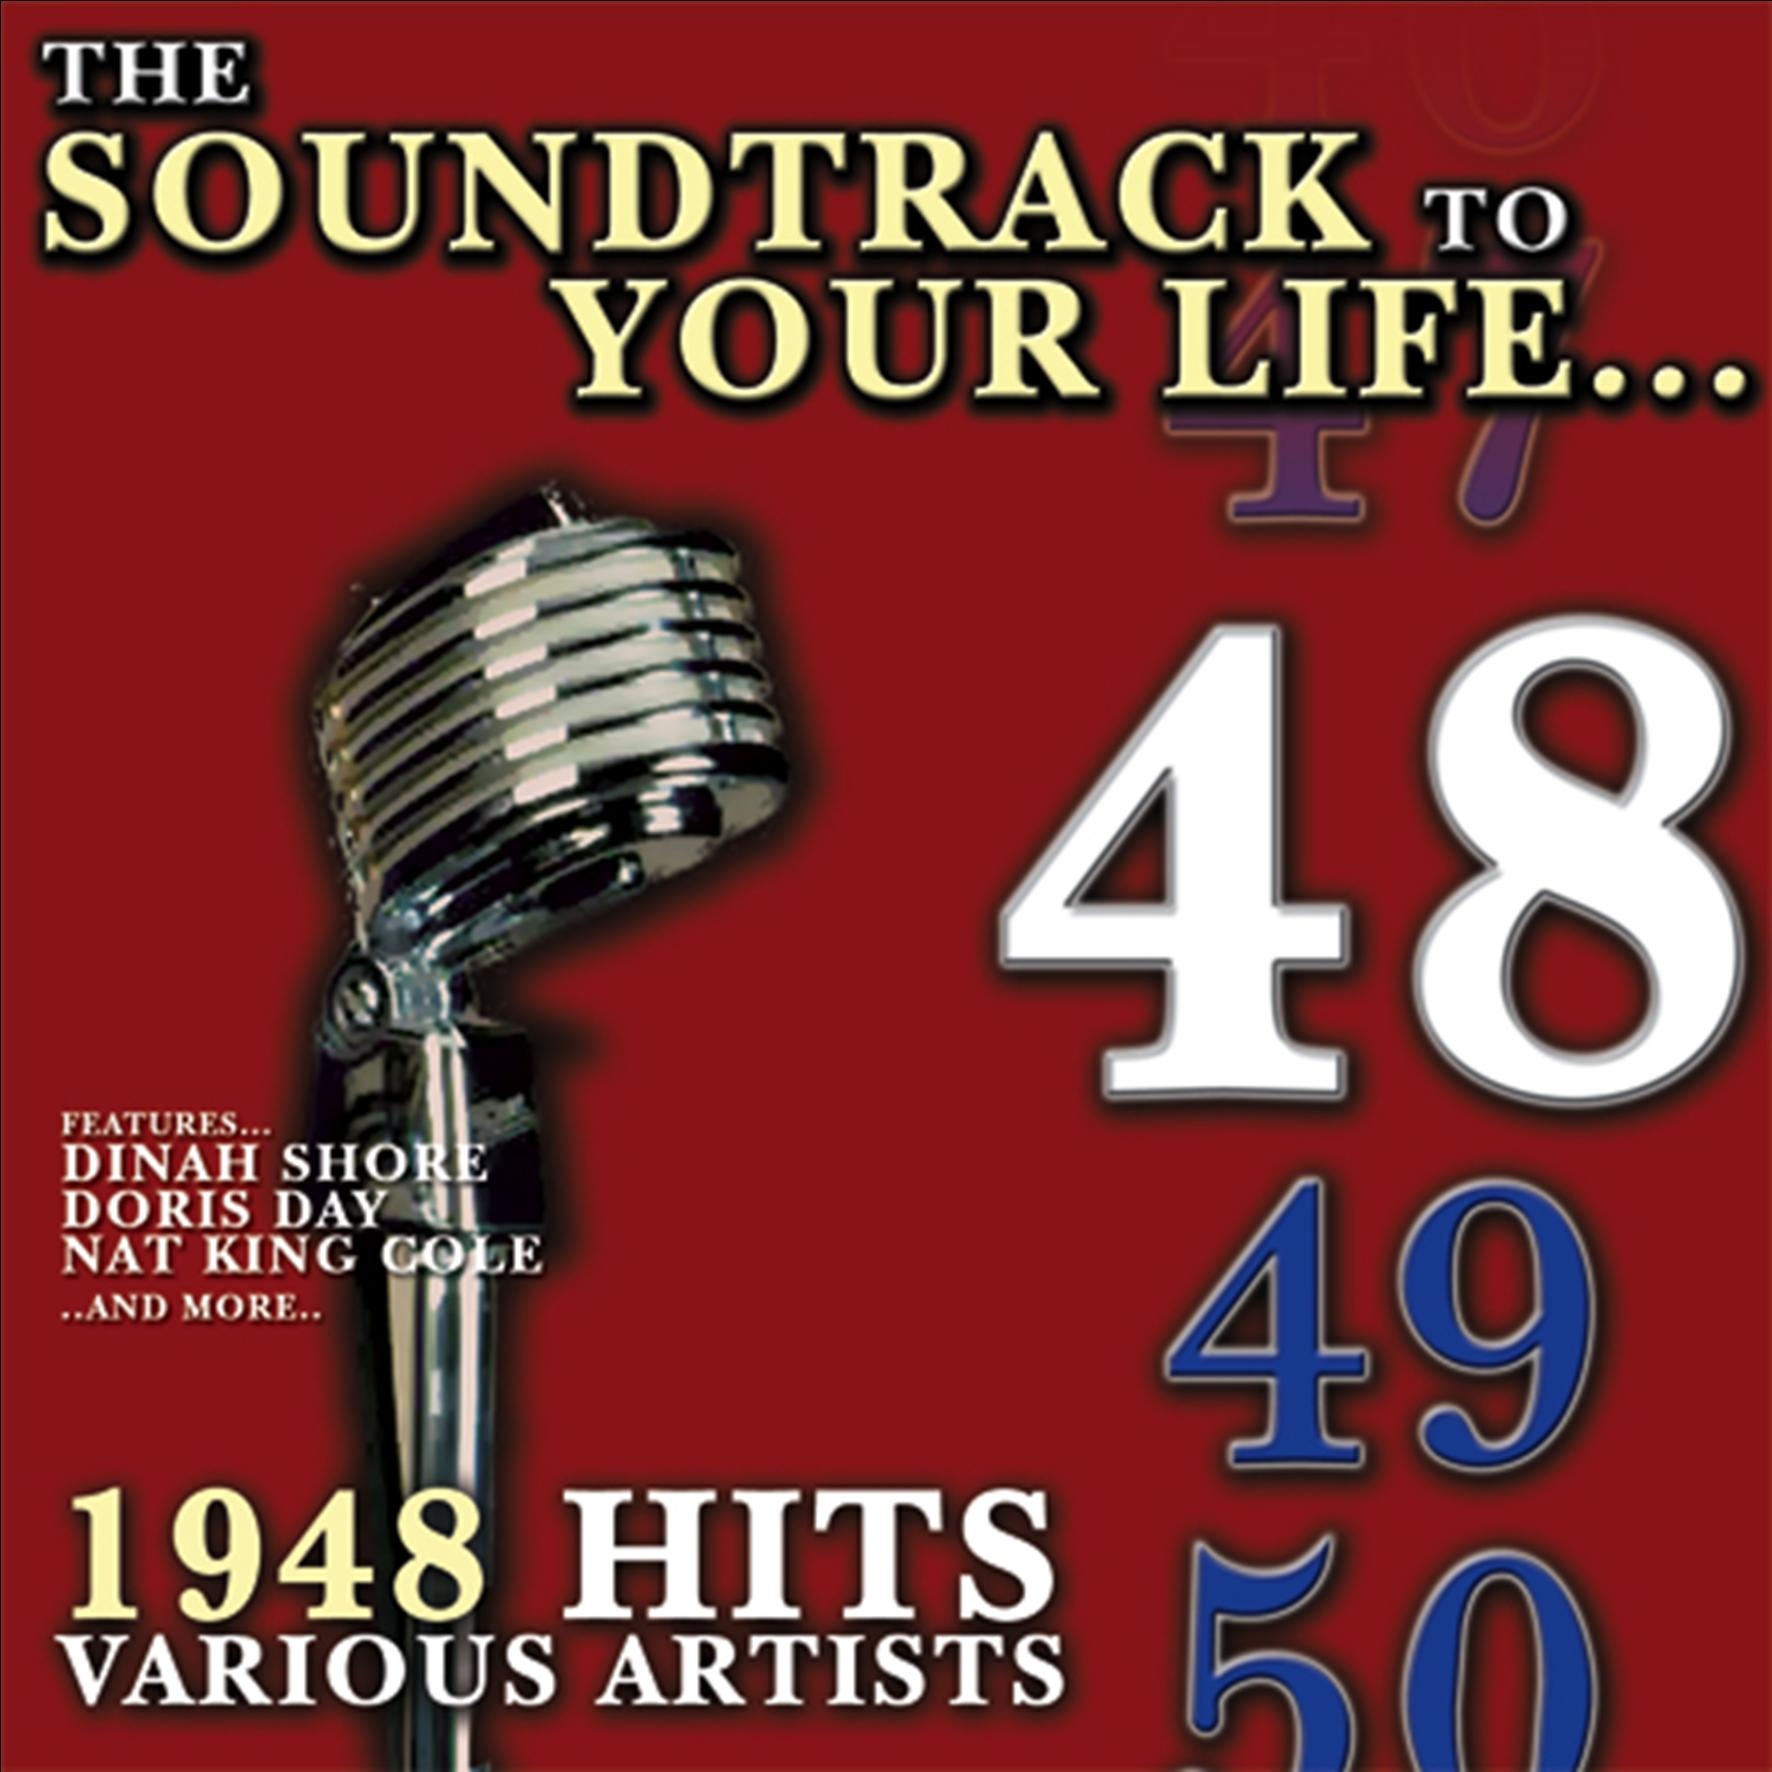 The Soundtrack to Your Life:1948 Hits